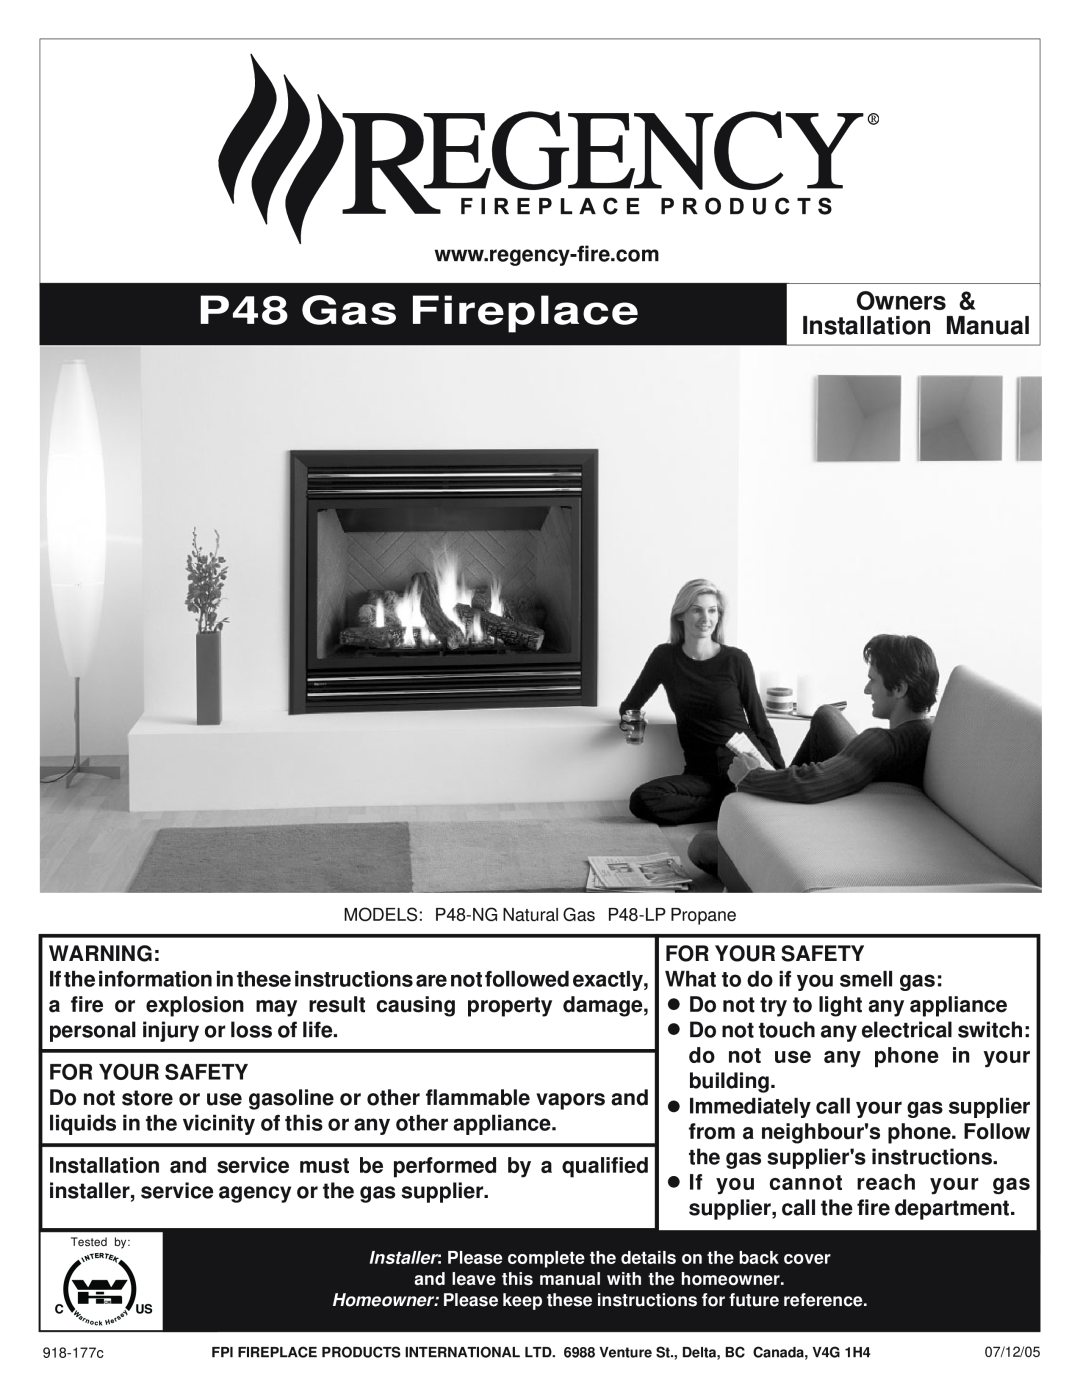 Regency P48-LP, P48-NG installation manual P48 Gas Fireplace, Owners, Installation Manual 